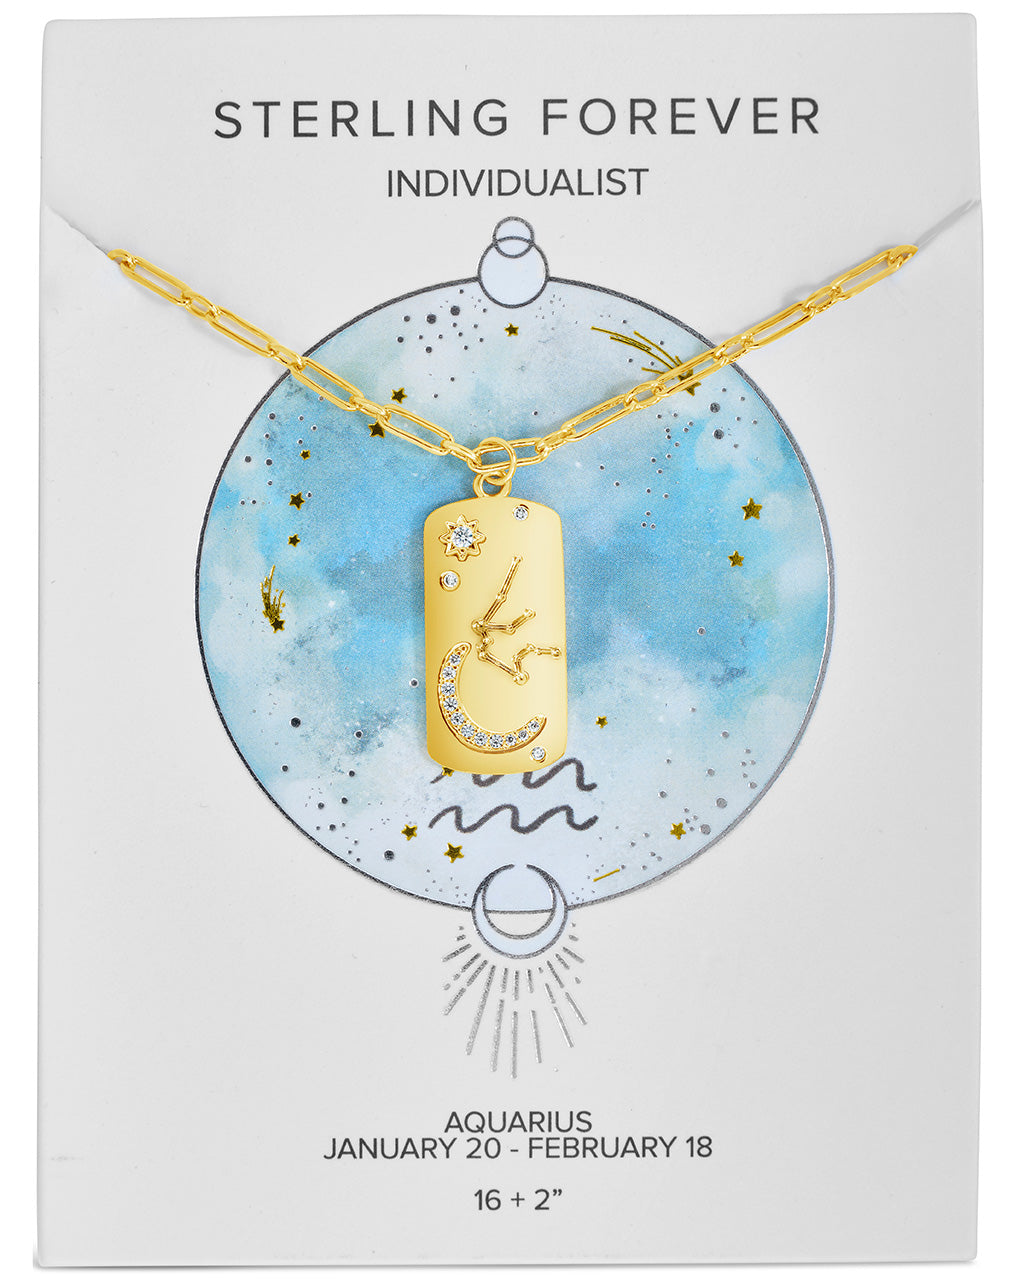 Constellation Dog Tag Necklace Necklace Sterling Forever Gold Aquarius (Jan 20 - Feb 18) 